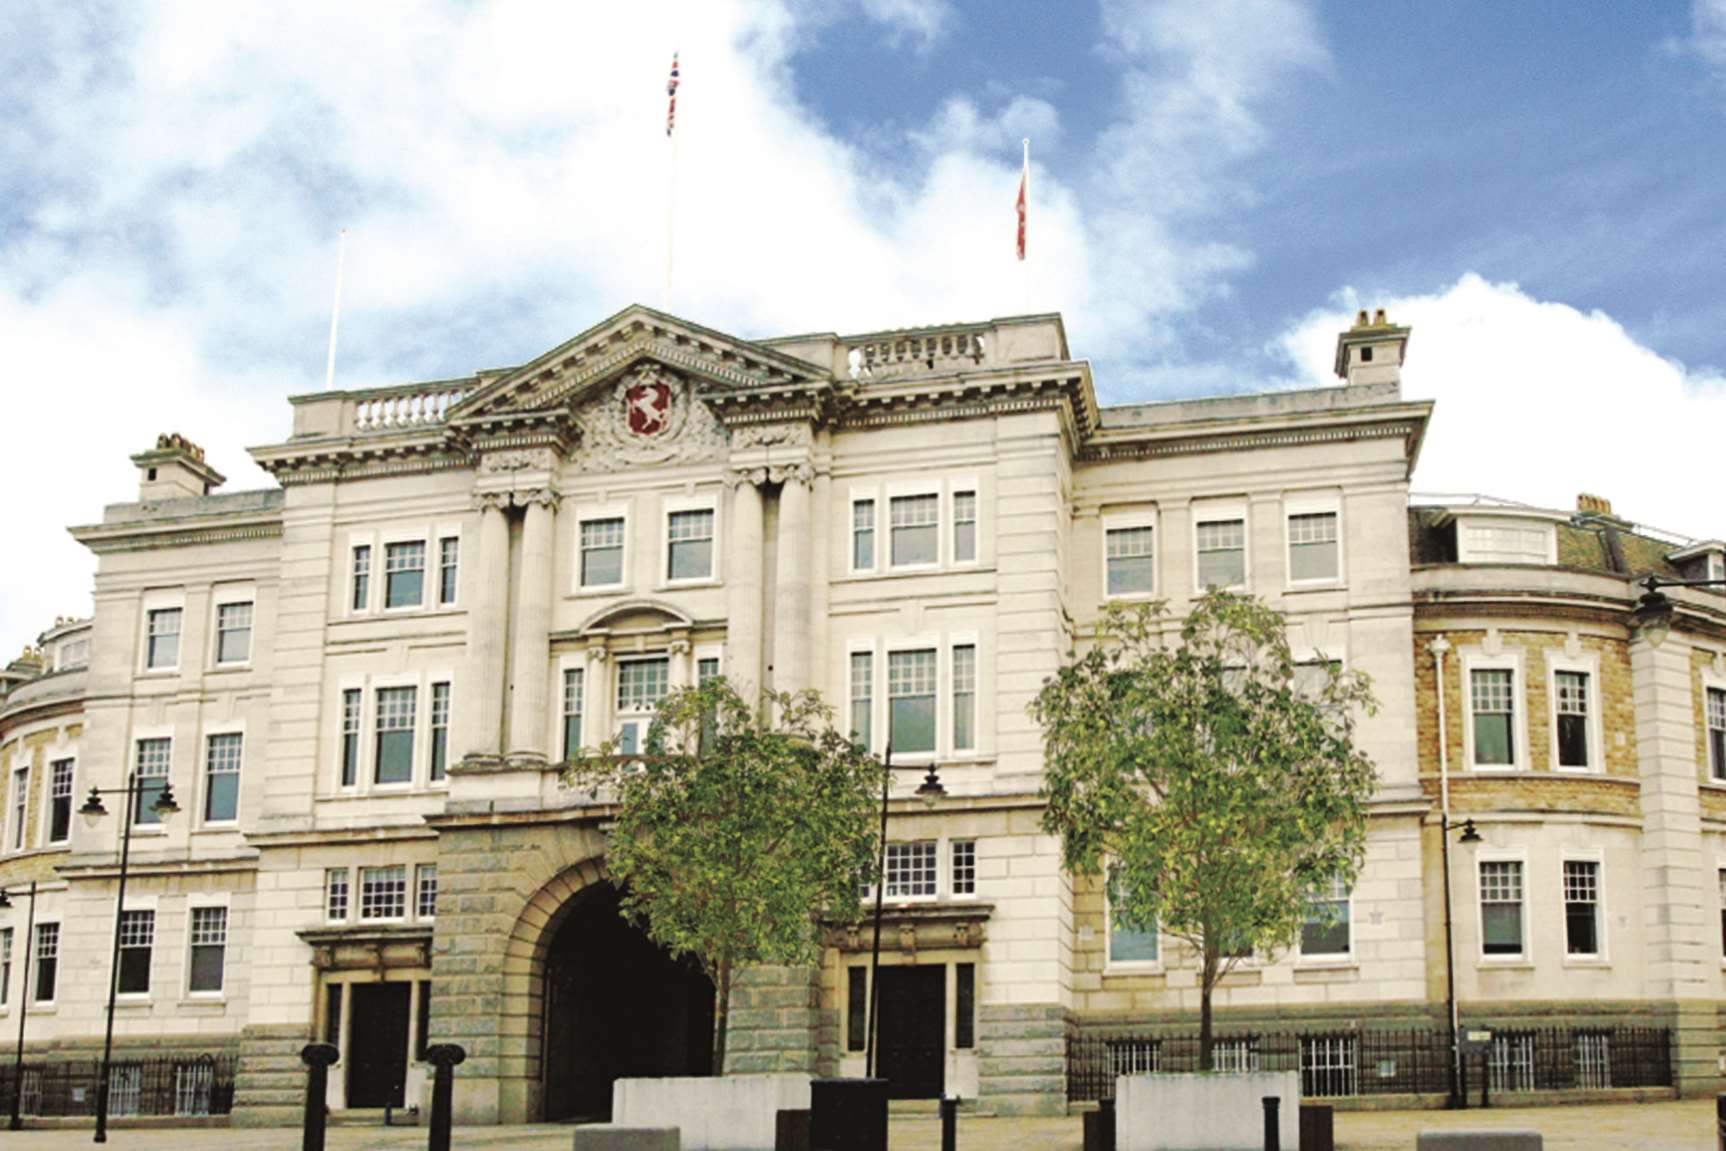 County Hall in Maidstone, KCC's headquarters